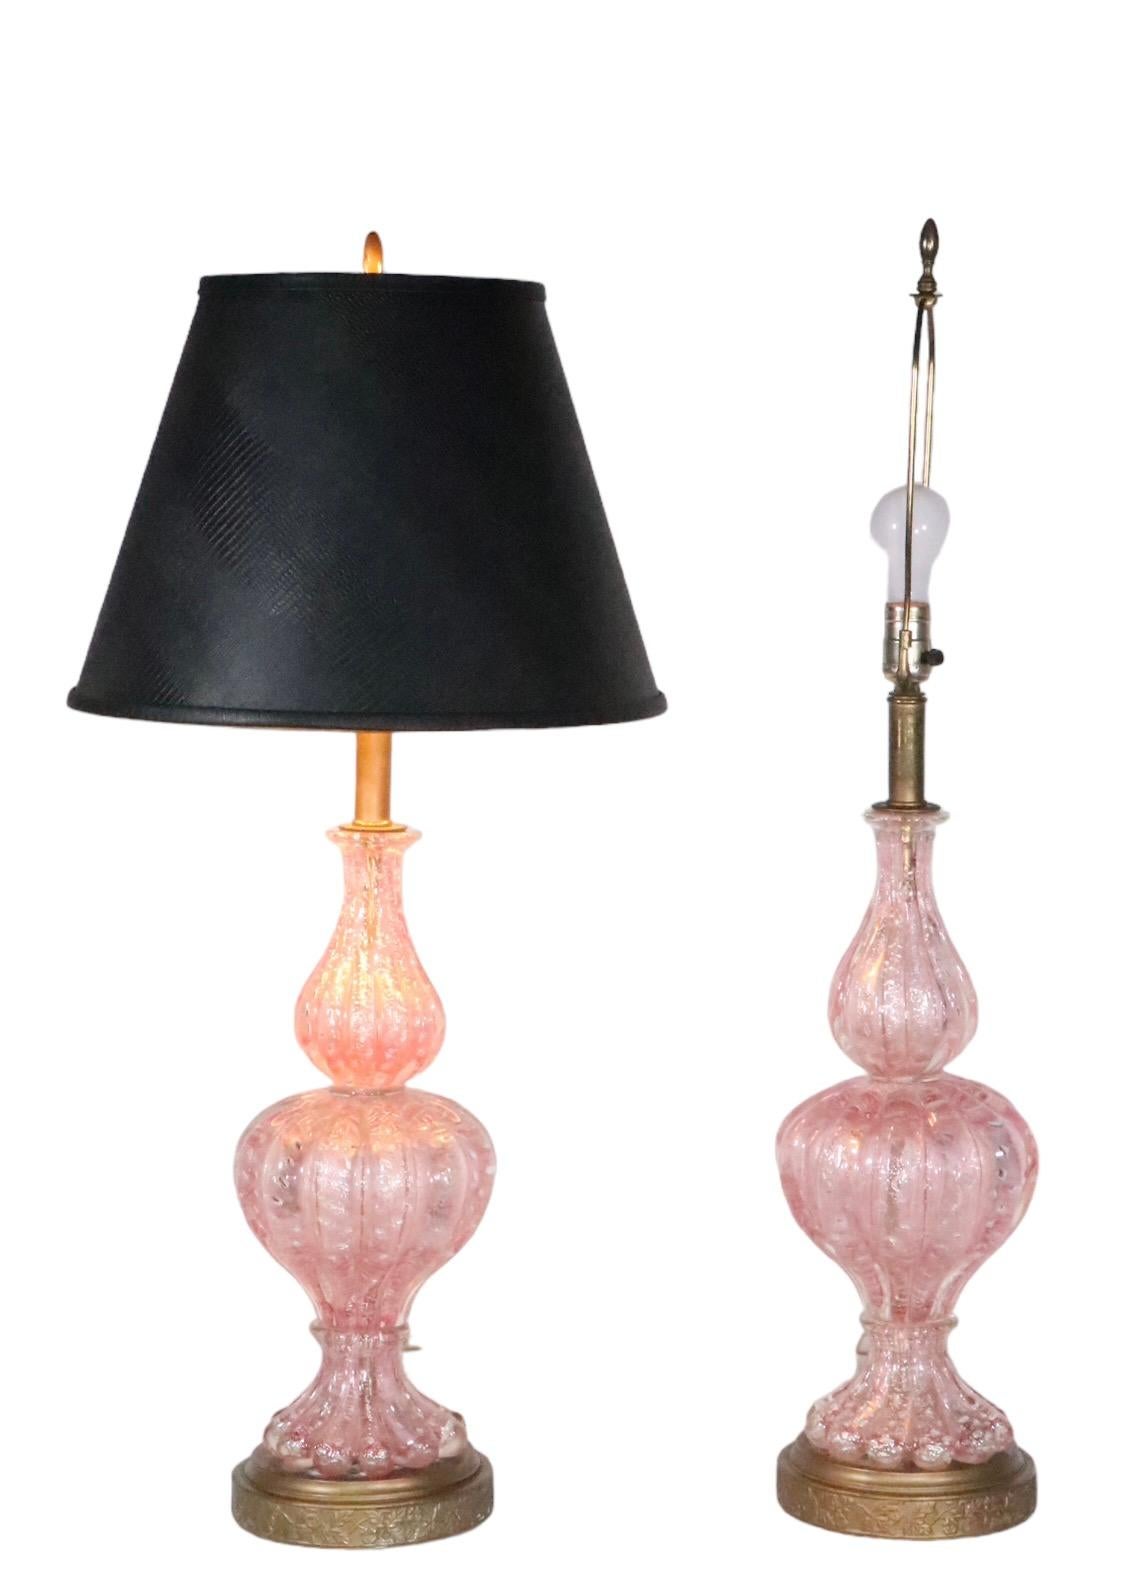 Italian Pr. Murano Art Glass Table Lamps Made in Italy  att.  to  Barovier c. 1950’s  For Sale